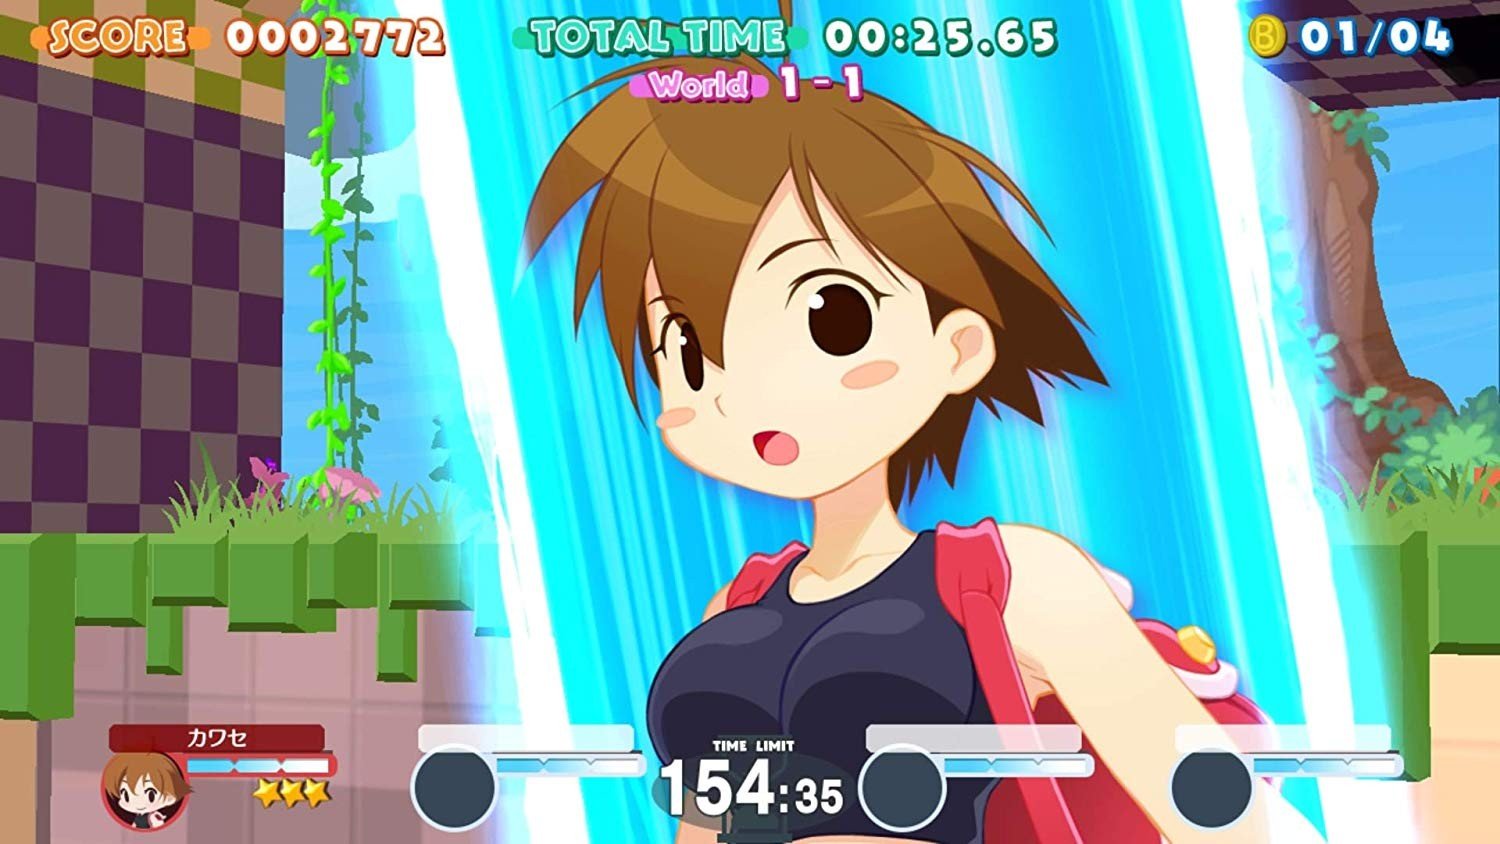 Umihara Kawase, Umihara Kawase BaZooKa, Umihara Kawase BaZooKa!!, 海腹川背 BaZooKa!!, Multi-language, Success, Japan, PS4, PlayStation 4, Nintendo Switch, Switch, pre-order, gameplay, features, release date, price, trailer, screenshots